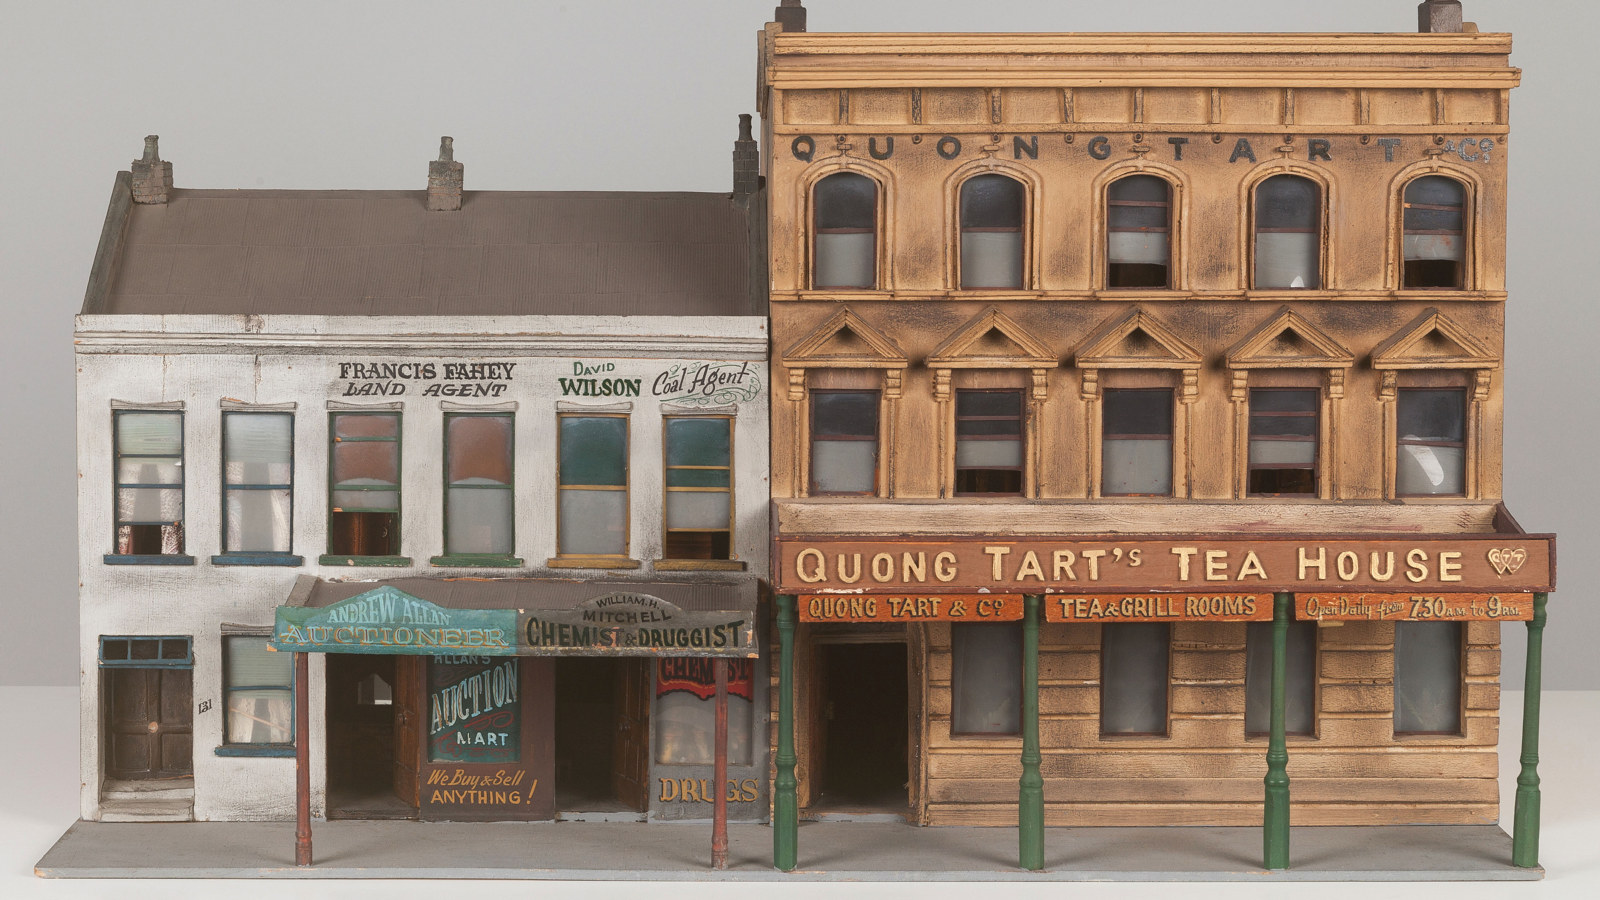 Architectural model of 2 adjoining buildings with verandahs facing a street. Awnings on the verandahs contain colourful signage and the names of businesses are written on the walls of the buildings.